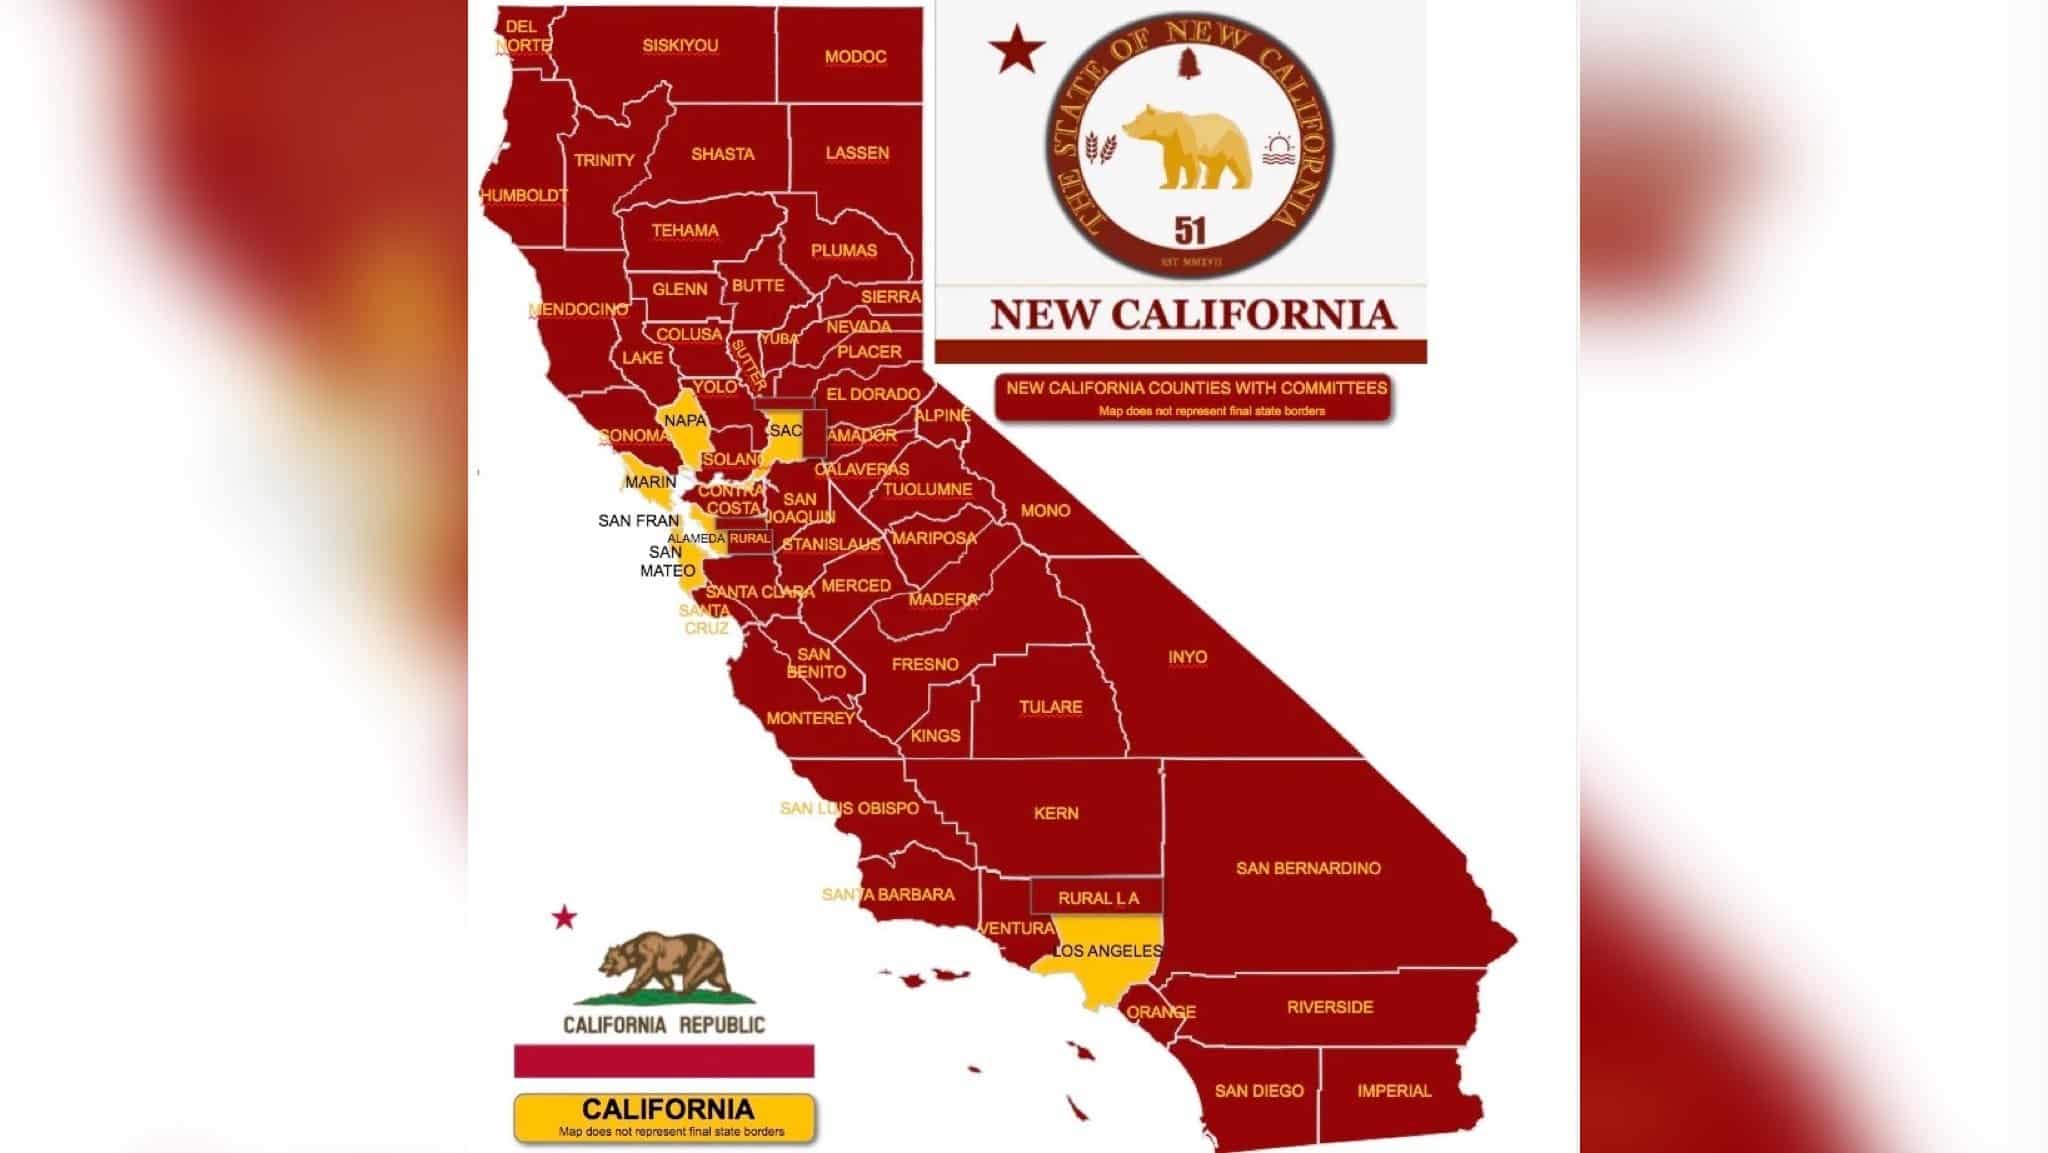 The State of New California Takes One Step Closer to Being America’s 51st State